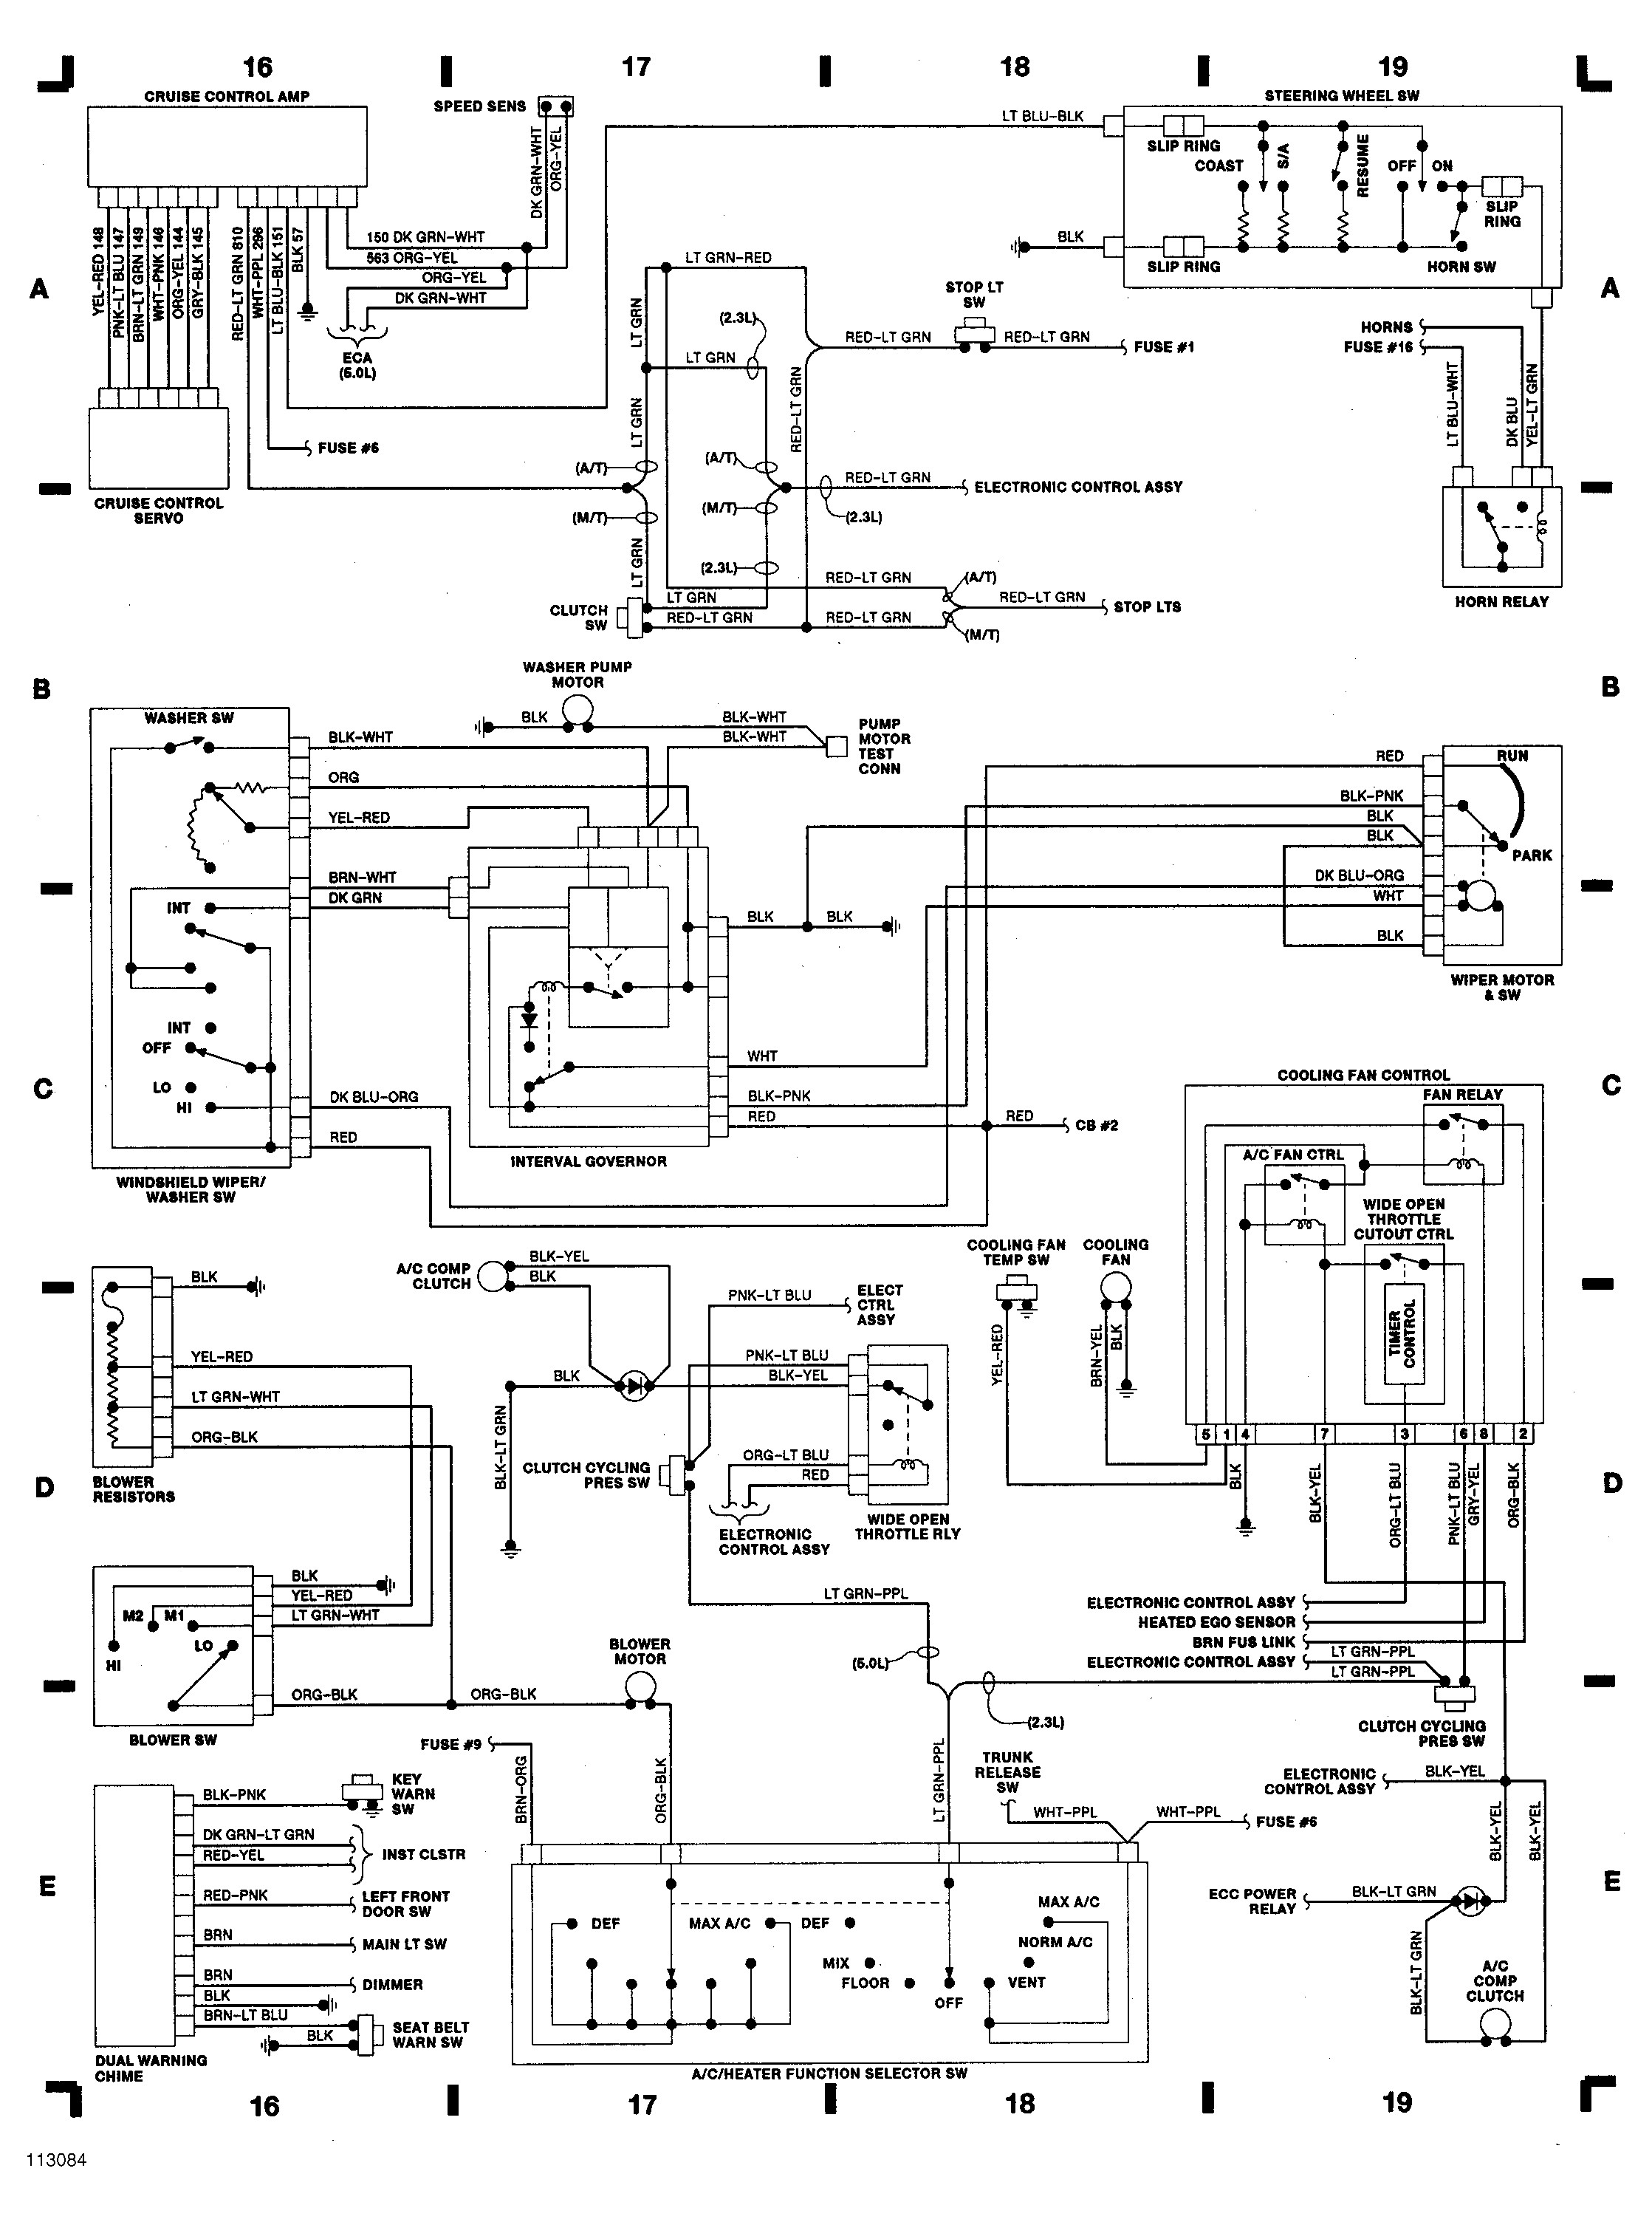 1995 ford F150 5 0 Engine Diagram ford Mustang Wiring Diagrams Further 1995 ford Mustang Wiring Of 1995 ford F150 5 0 Engine Diagram